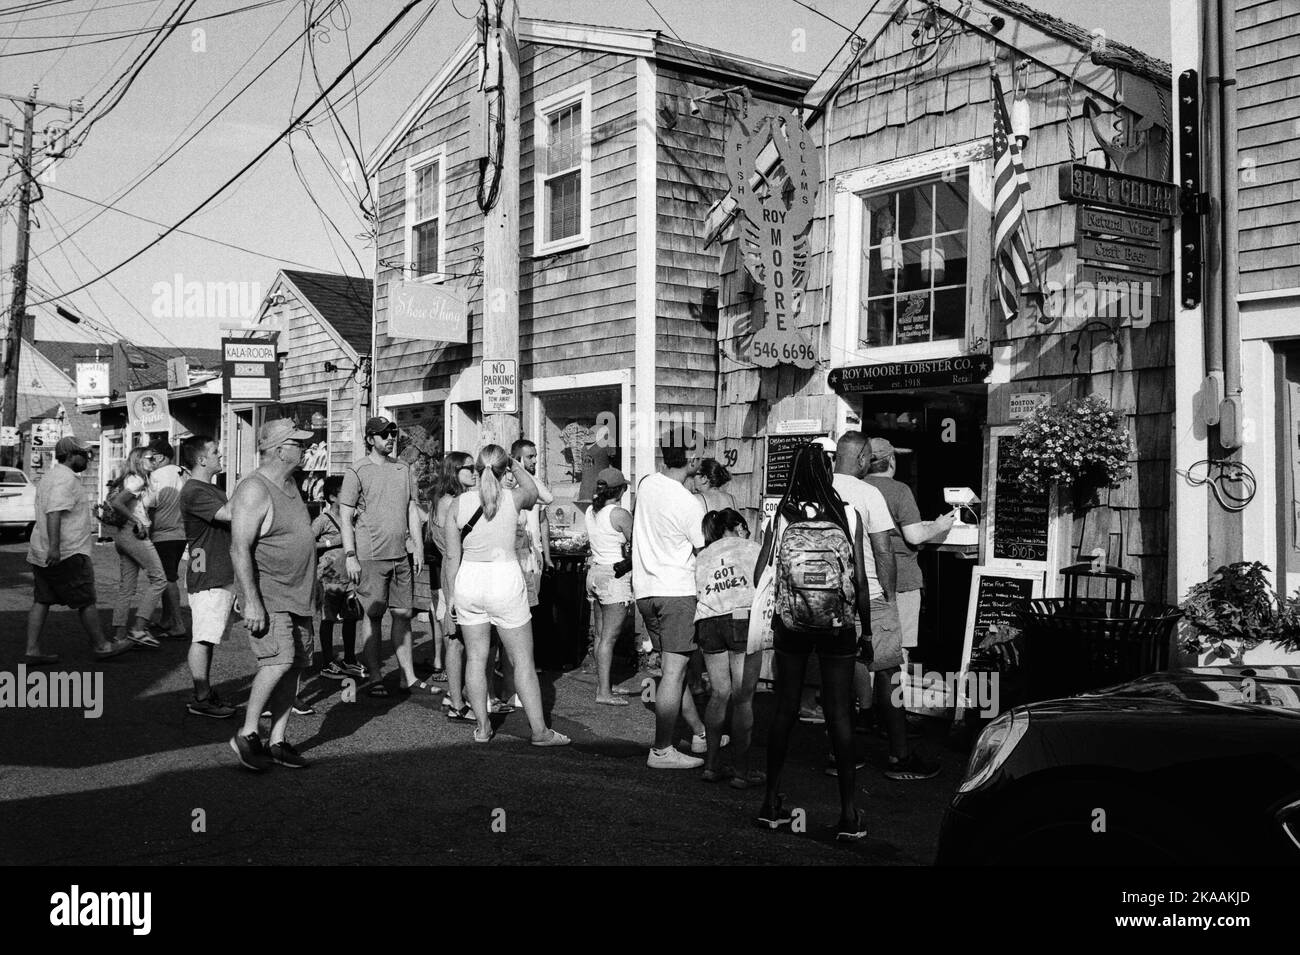 The landmark Roy Moore Lobster Company with a line across the street for lunch in Rockport, Massachusetts. The image was captured on analog black-and-wh Stock Photo